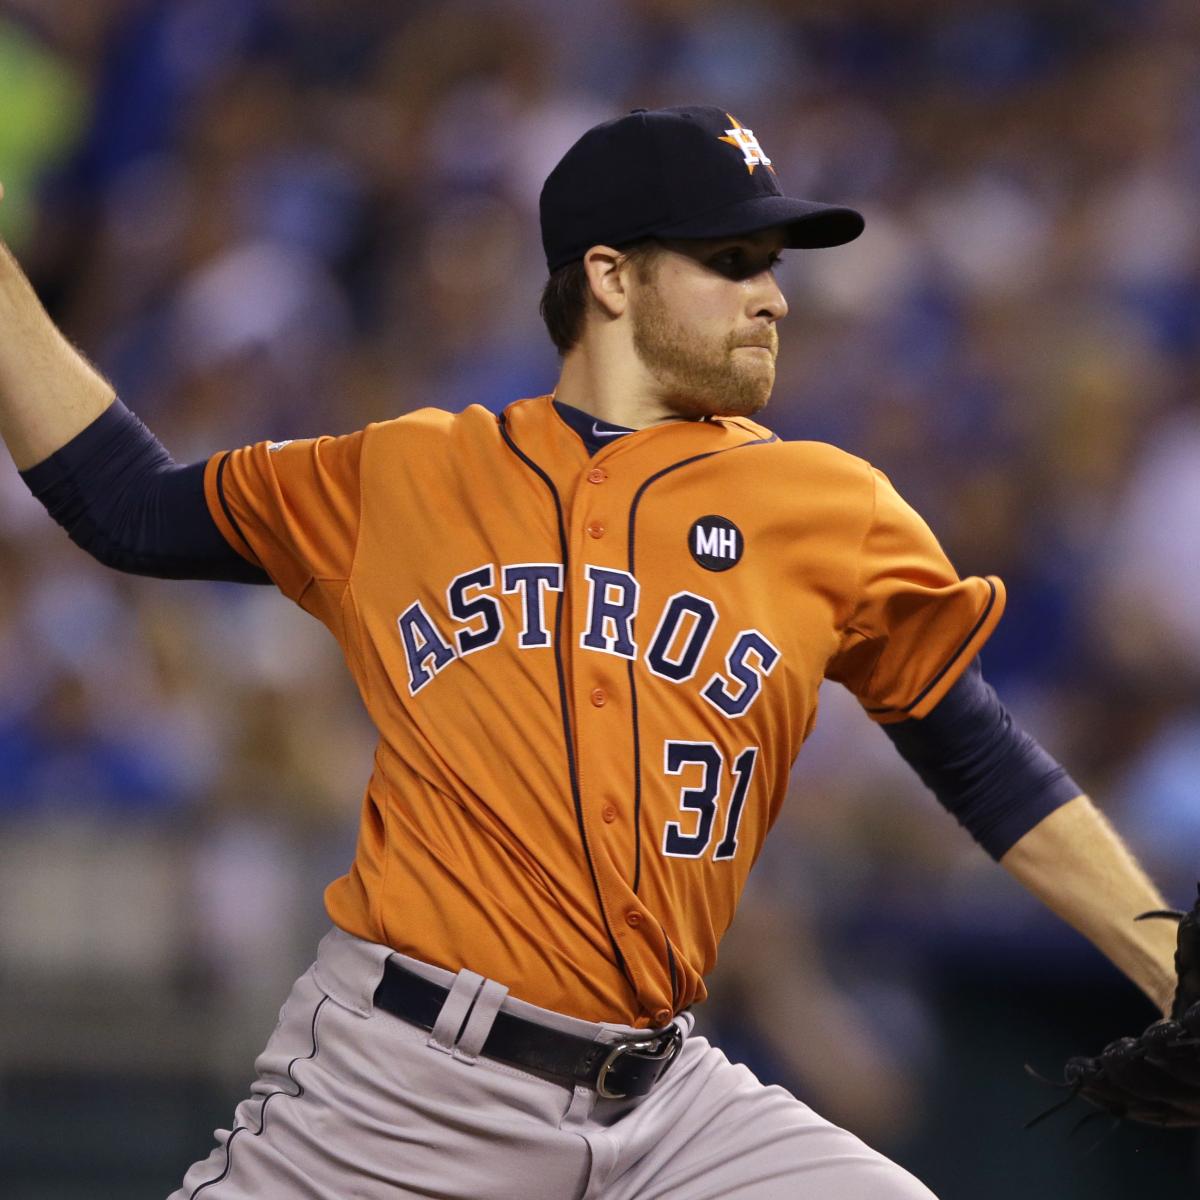 Astros vs. Royals Game 1 Score and Twitter Reaction from 2015 MLB